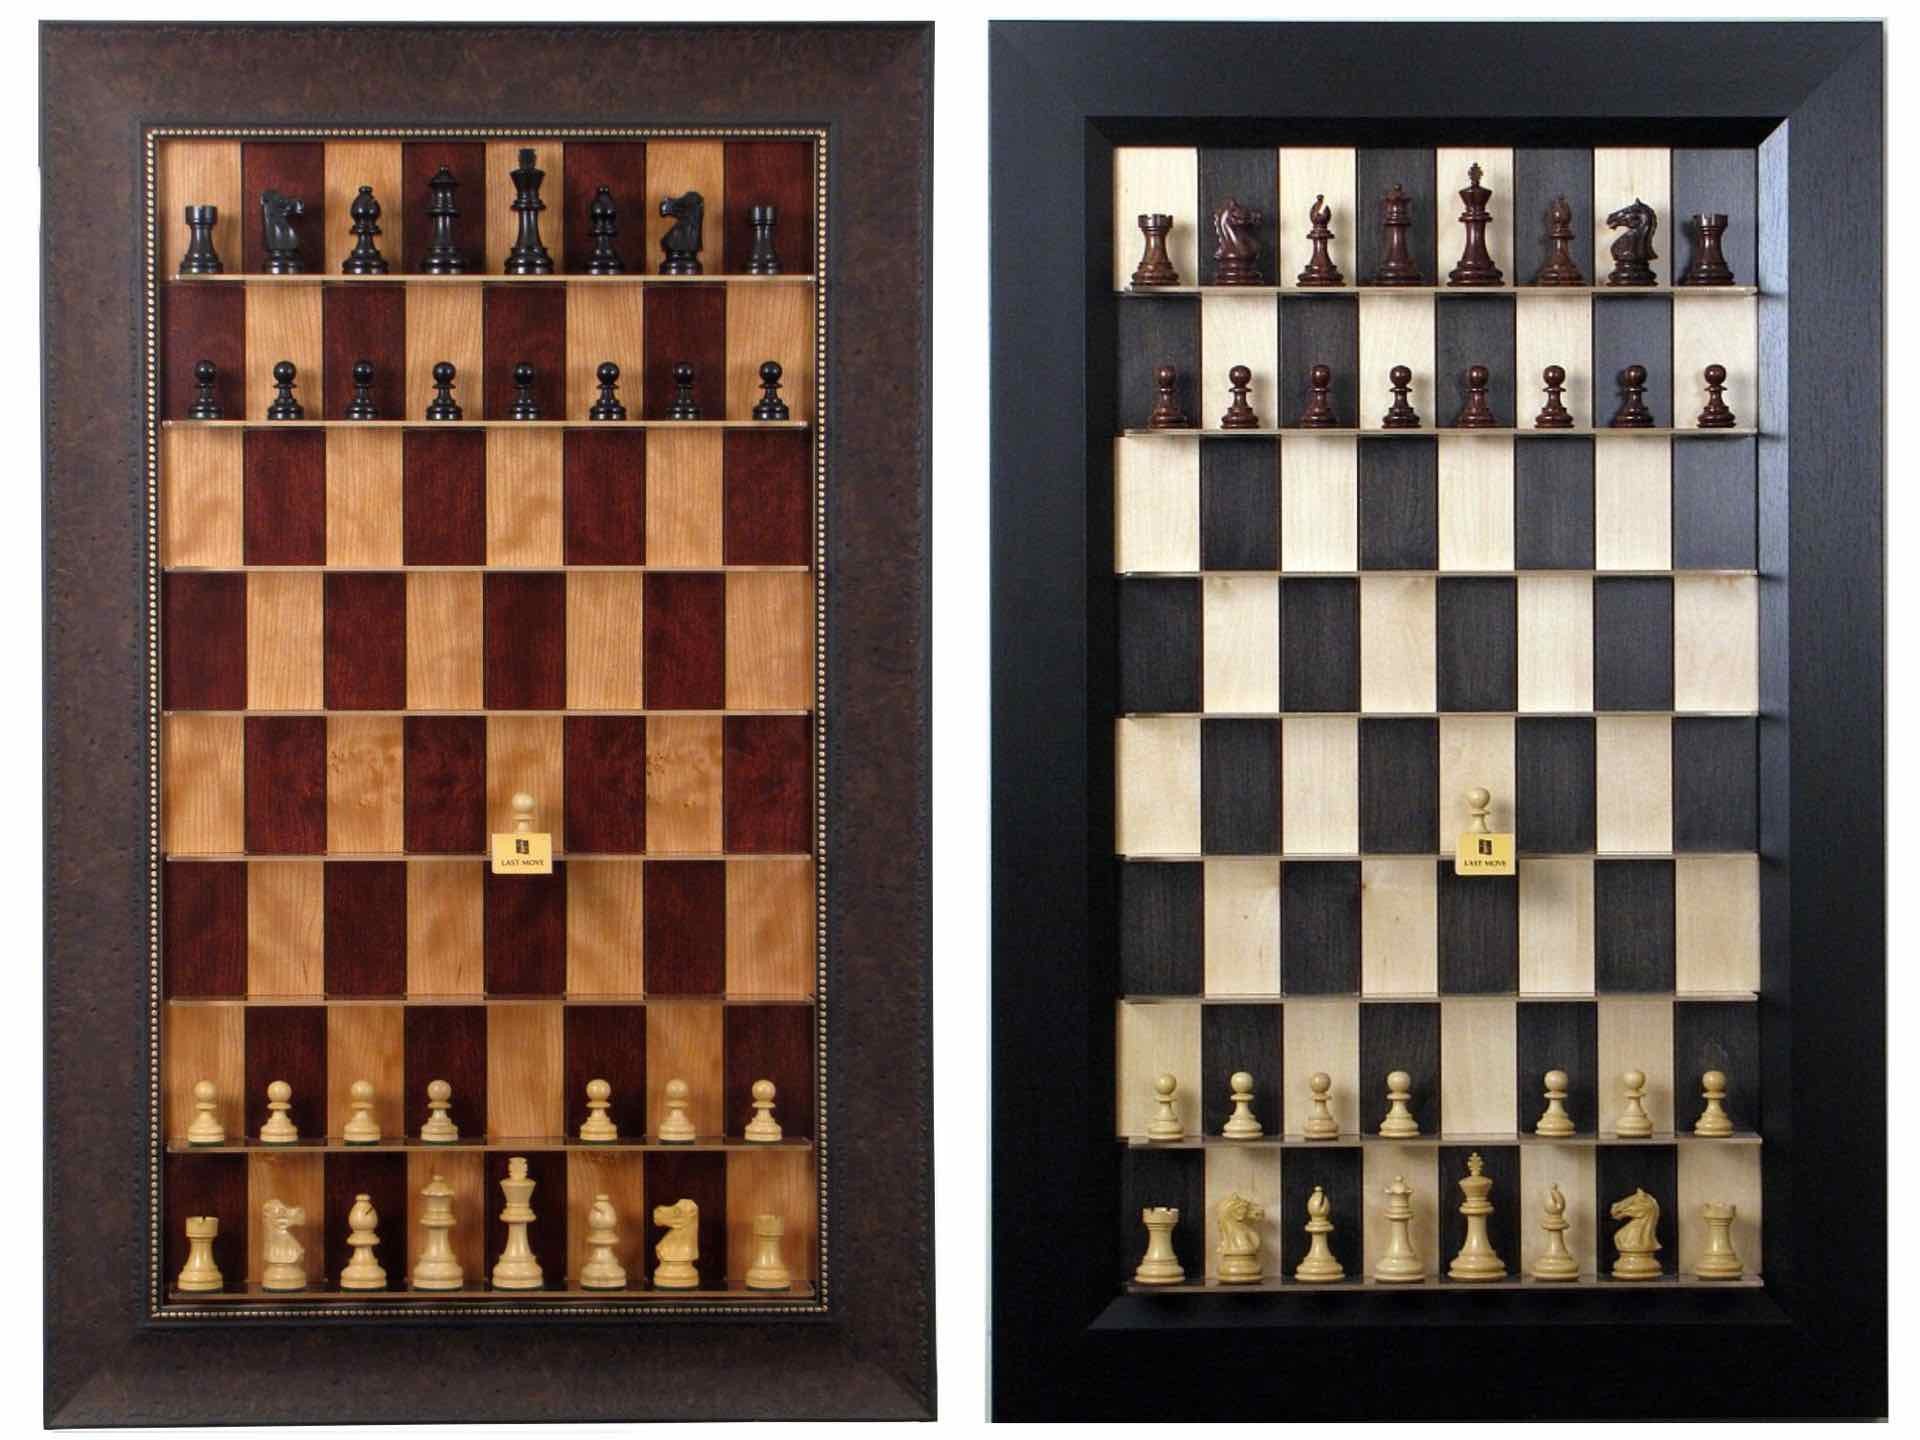 "Straight Up Chess" vertical chess boards. ($280–$360, depending on model)